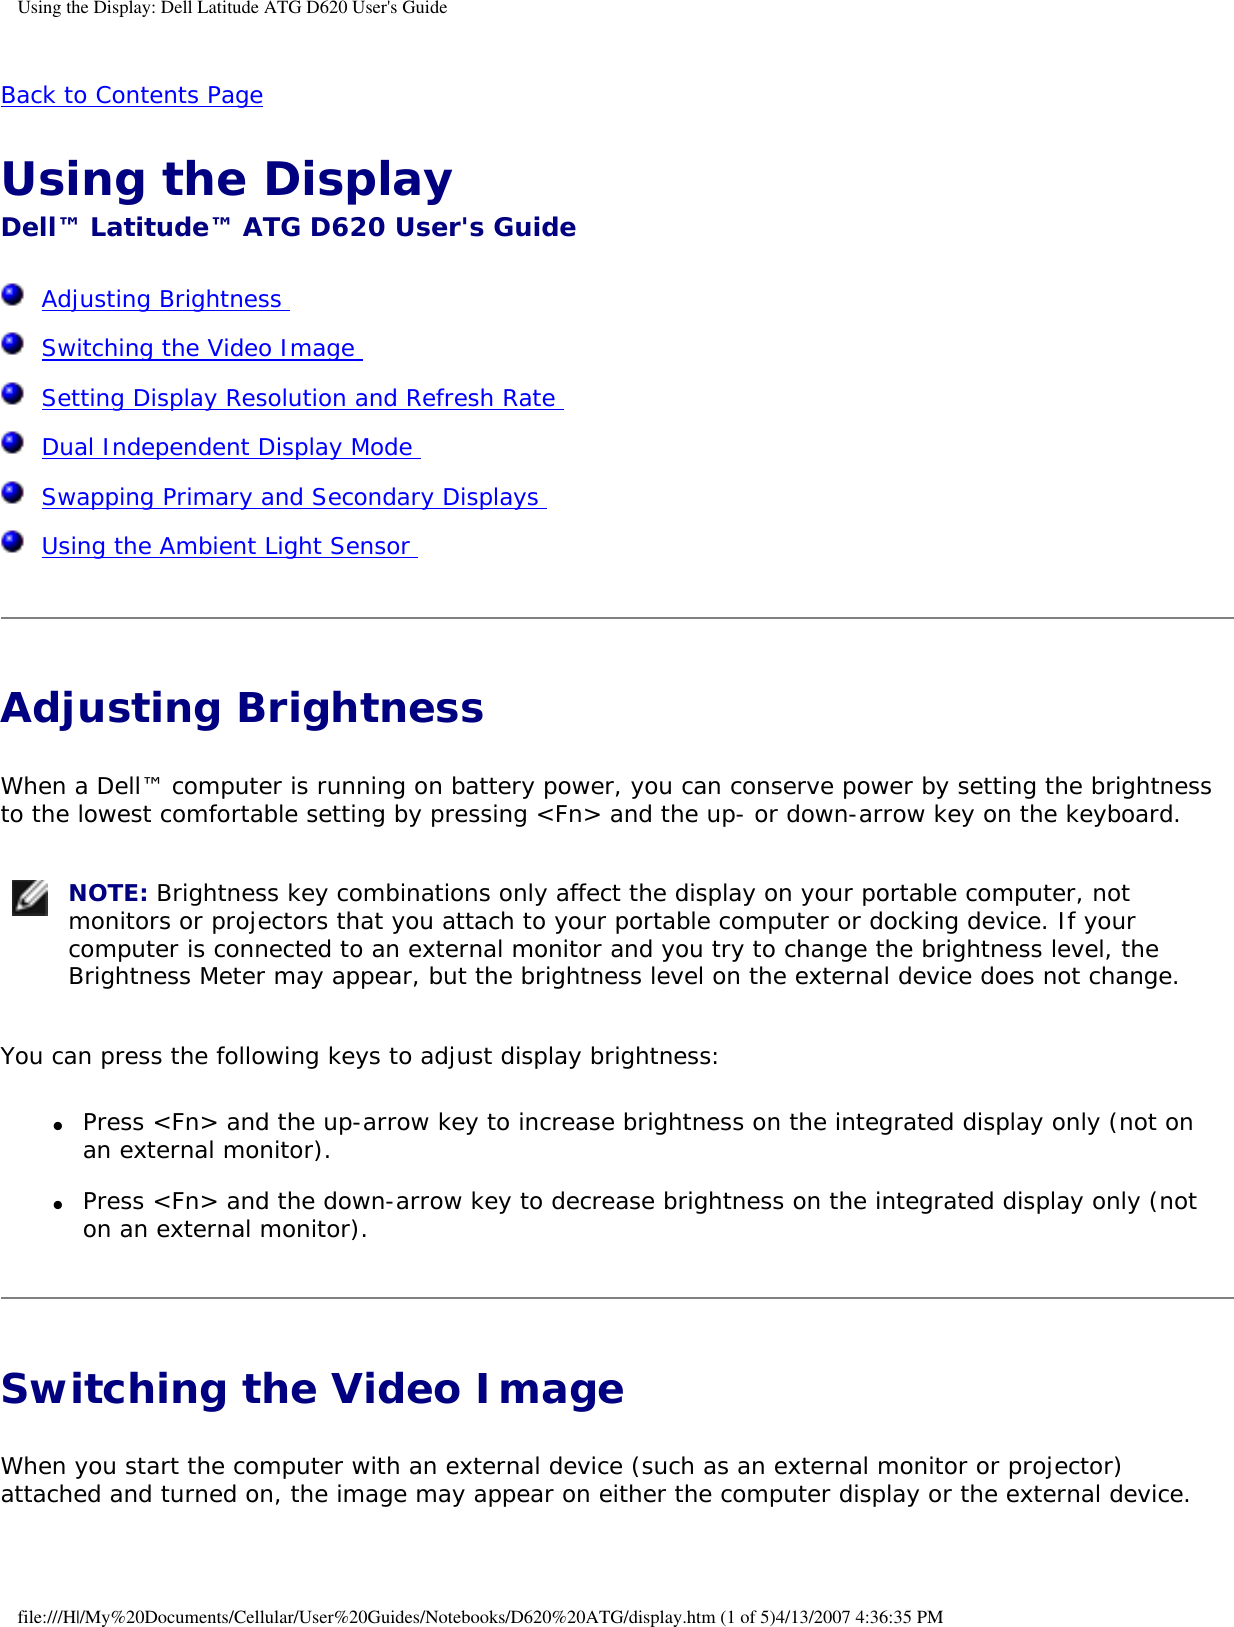 Using the Display: Dell Latitude ATG D620 User&apos;s GuideBack to Contents Page Using the Display Dell™ Latitude™ ATG D620 User&apos;s Guide  Adjusting Brightness   Switching the Video Image   Setting Display Resolution and Refresh Rate   Dual Independent Display Mode   Swapping Primary and Secondary Displays   Using the Ambient Light Sensor  Adjusting Brightness When a Dell™ computer is running on battery power, you can conserve power by setting the brightness to the lowest comfortable setting by pressing &lt;Fn&gt; and the up- or down-arrow key on the keyboard. NOTE: Brightness key combinations only affect the display on your portable computer, not monitors or projectors that you attach to your portable computer or docking device. If your computer is connected to an external monitor and you try to change the brightness level, the Brightness Meter may appear, but the brightness level on the external device does not change. You can press the following keys to adjust display brightness:●     Press &lt;Fn&gt; and the up-arrow key to increase brightness on the integrated display only (not on an external monitor).  ●     Press &lt;Fn&gt; and the down-arrow key to decrease brightness on the integrated display only (not on an external monitor).  Switching the Video Image When you start the computer with an external device (such as an external monitor or projector) attached and turned on, the image may appear on either the computer display or the external device.file:///H|/My%20Documents/Cellular/User%20Guides/Notebooks/D620%20ATG/display.htm (1 of 5)4/13/2007 4:36:35 PM